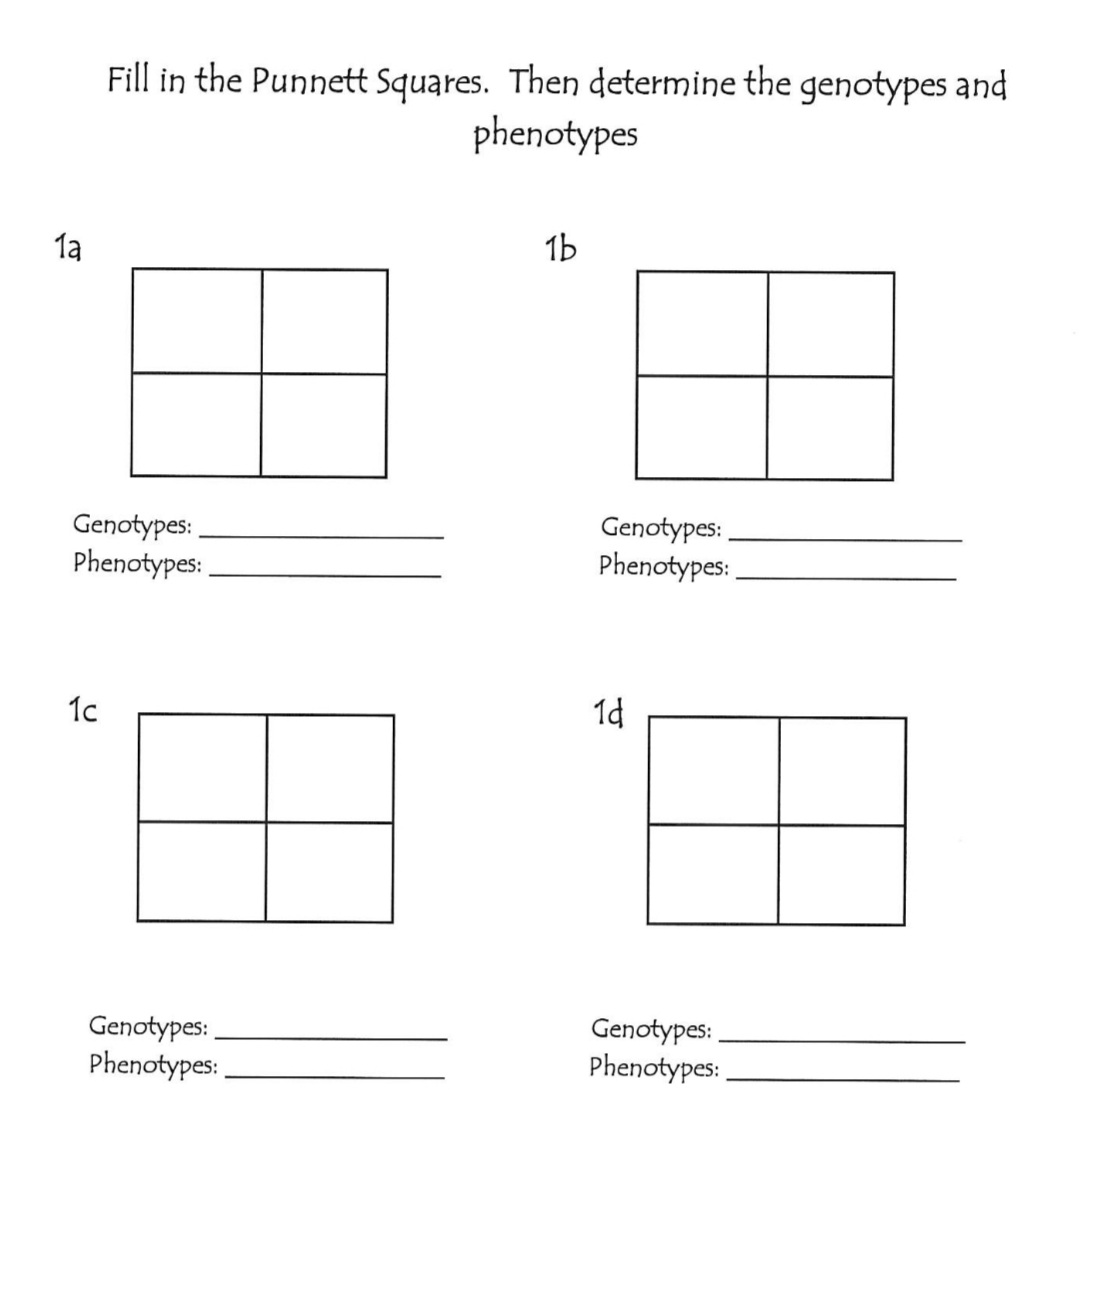 1a
Fill in the Punnett Squares. Then determine the genotypes and
phenotypes
Genotypes:
Phenotypes:
1c
Genotypes:
Phenotypes:
1b
Genotypes:
Phenotypes:
14
Genotypes:
Phenotypes: